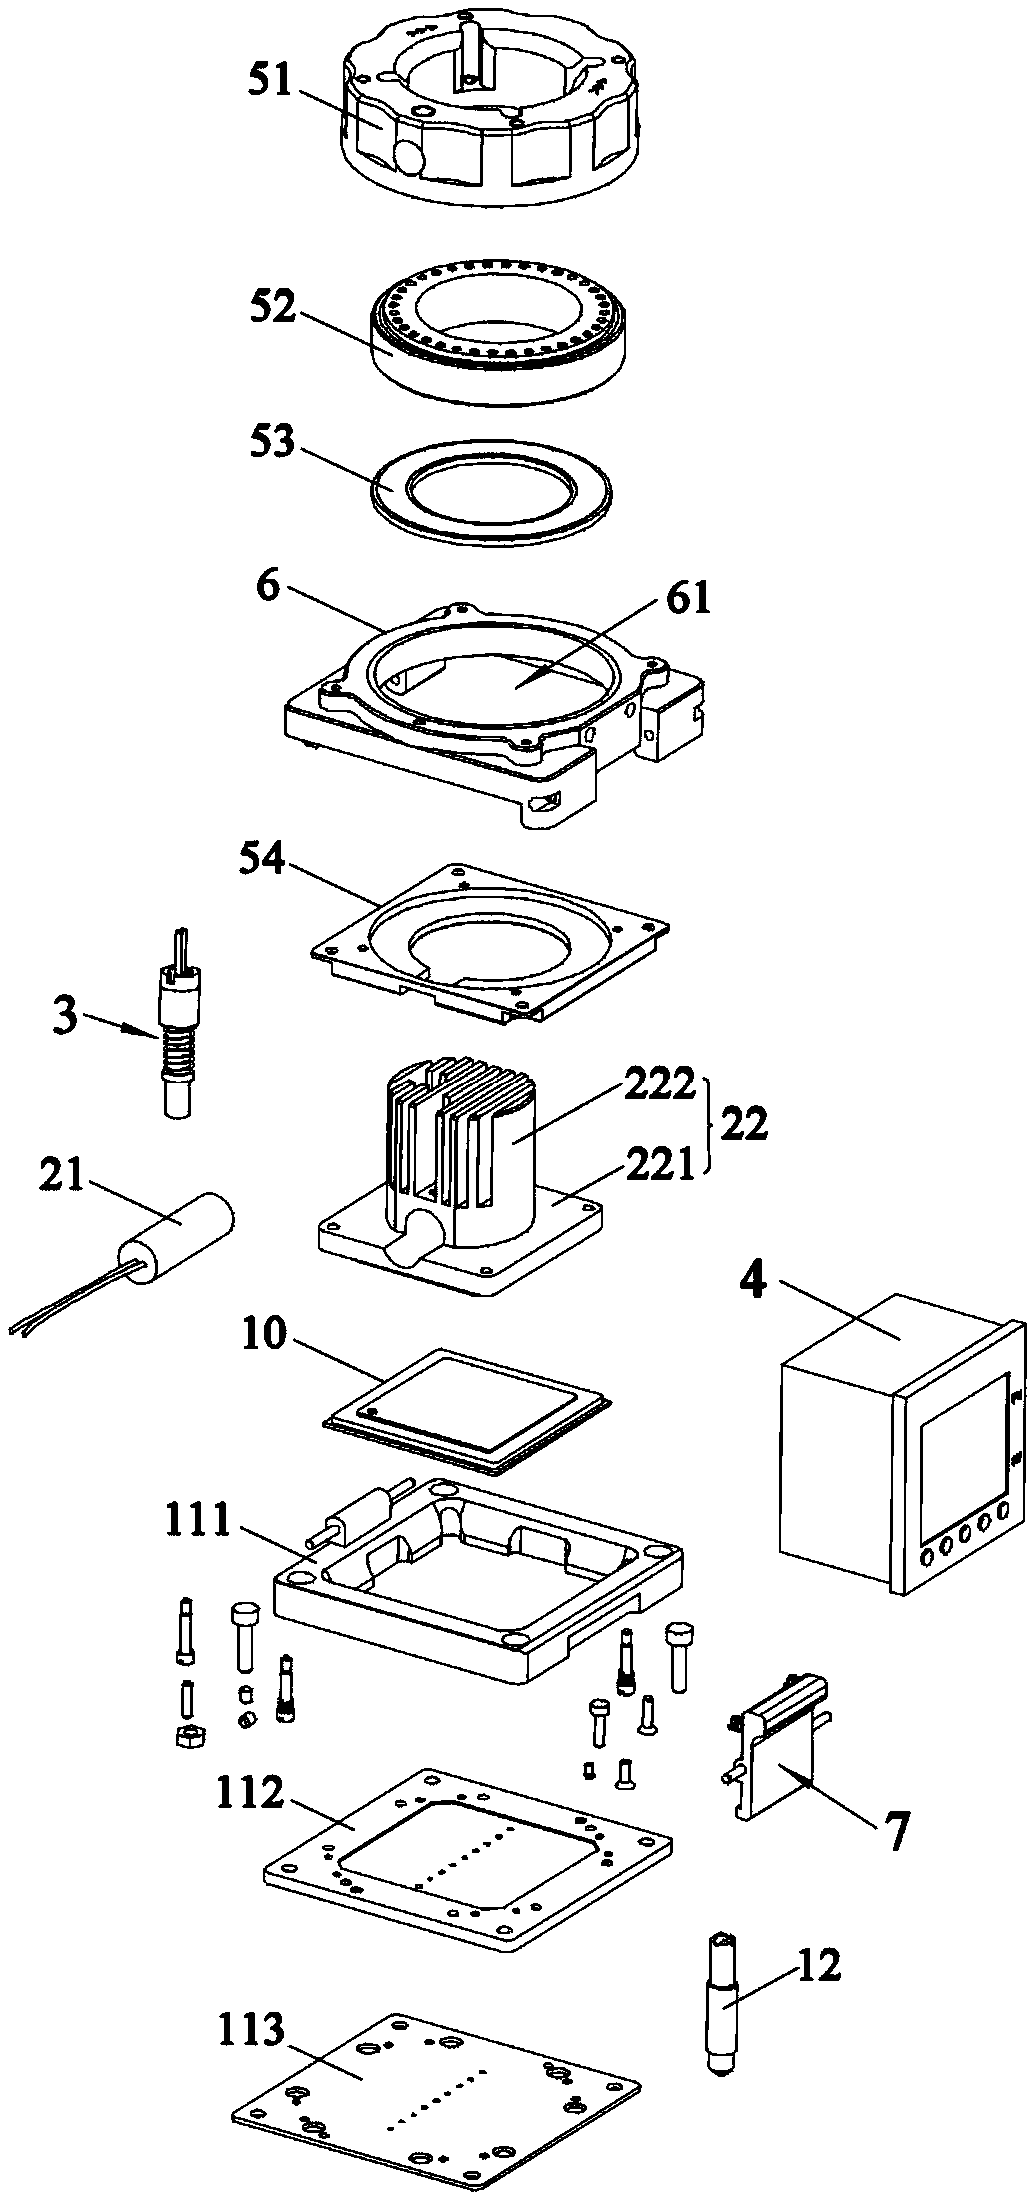 Chip testing device